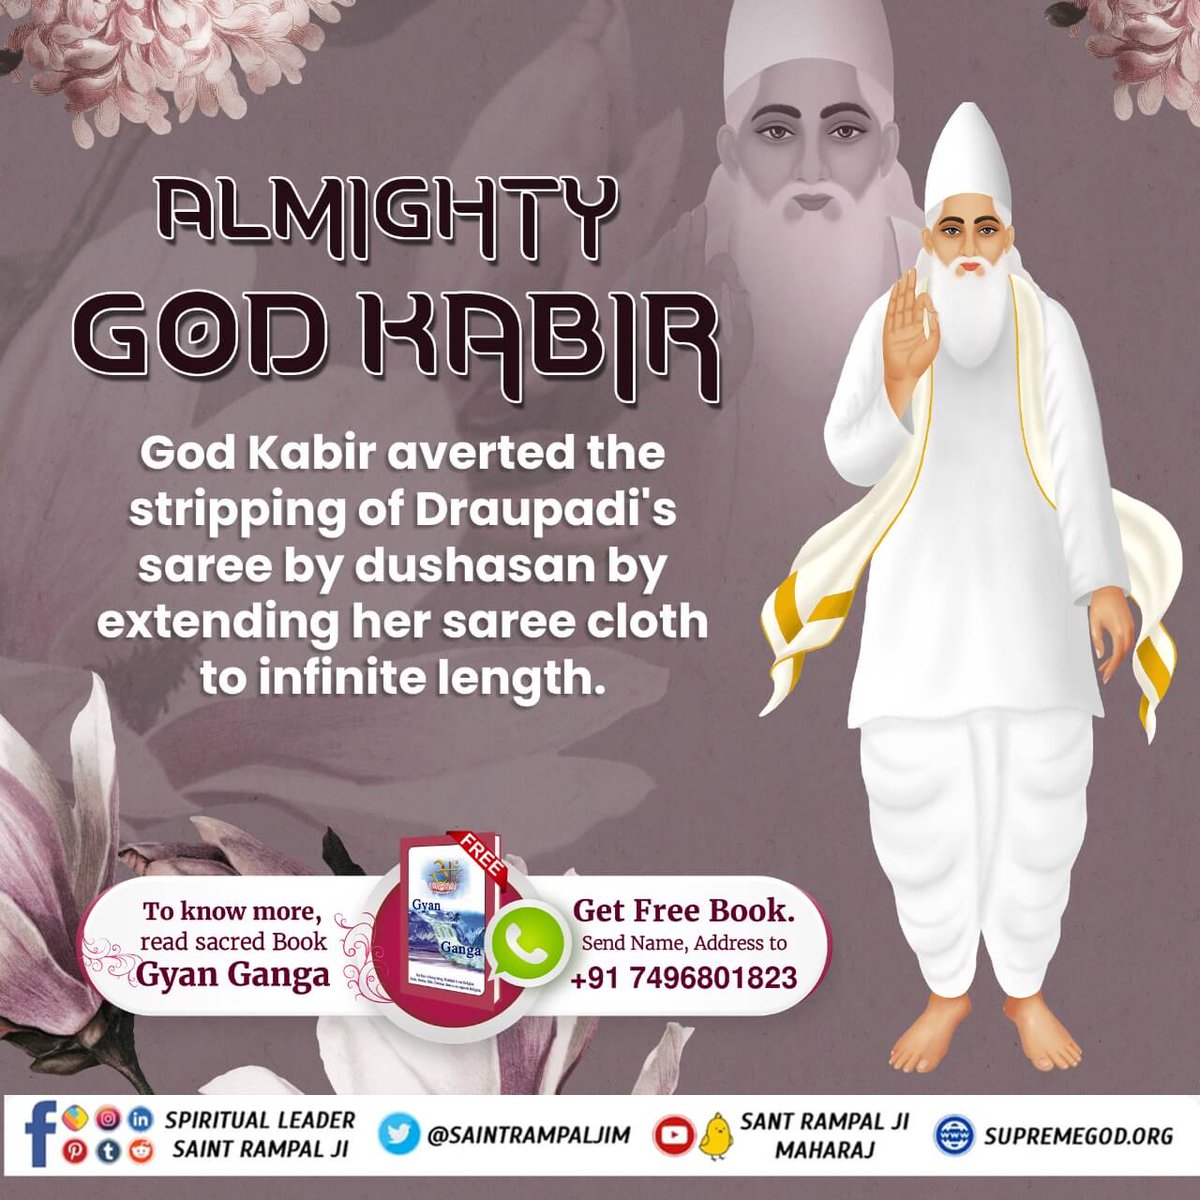 #GodNightSaturday
ALMIGHTY GOD KABIR‌ God Kabir averted the stripping of Draupadi's saree by dushasan by extending her saree cloth to infinite length.